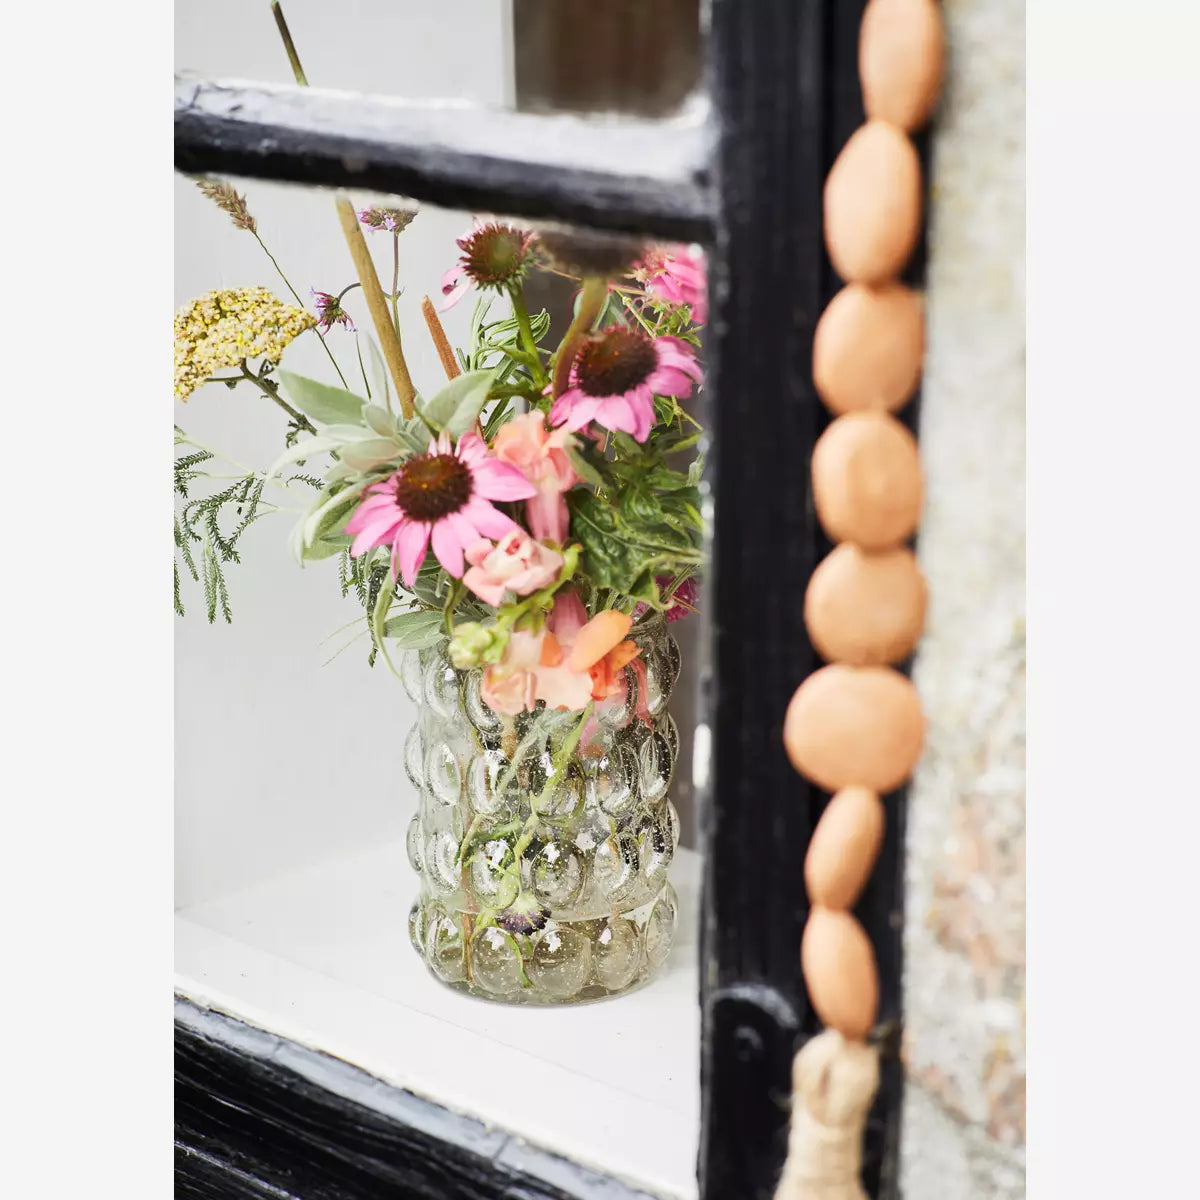 Glass vase filled with flowers from the garden placed on a windowsill.